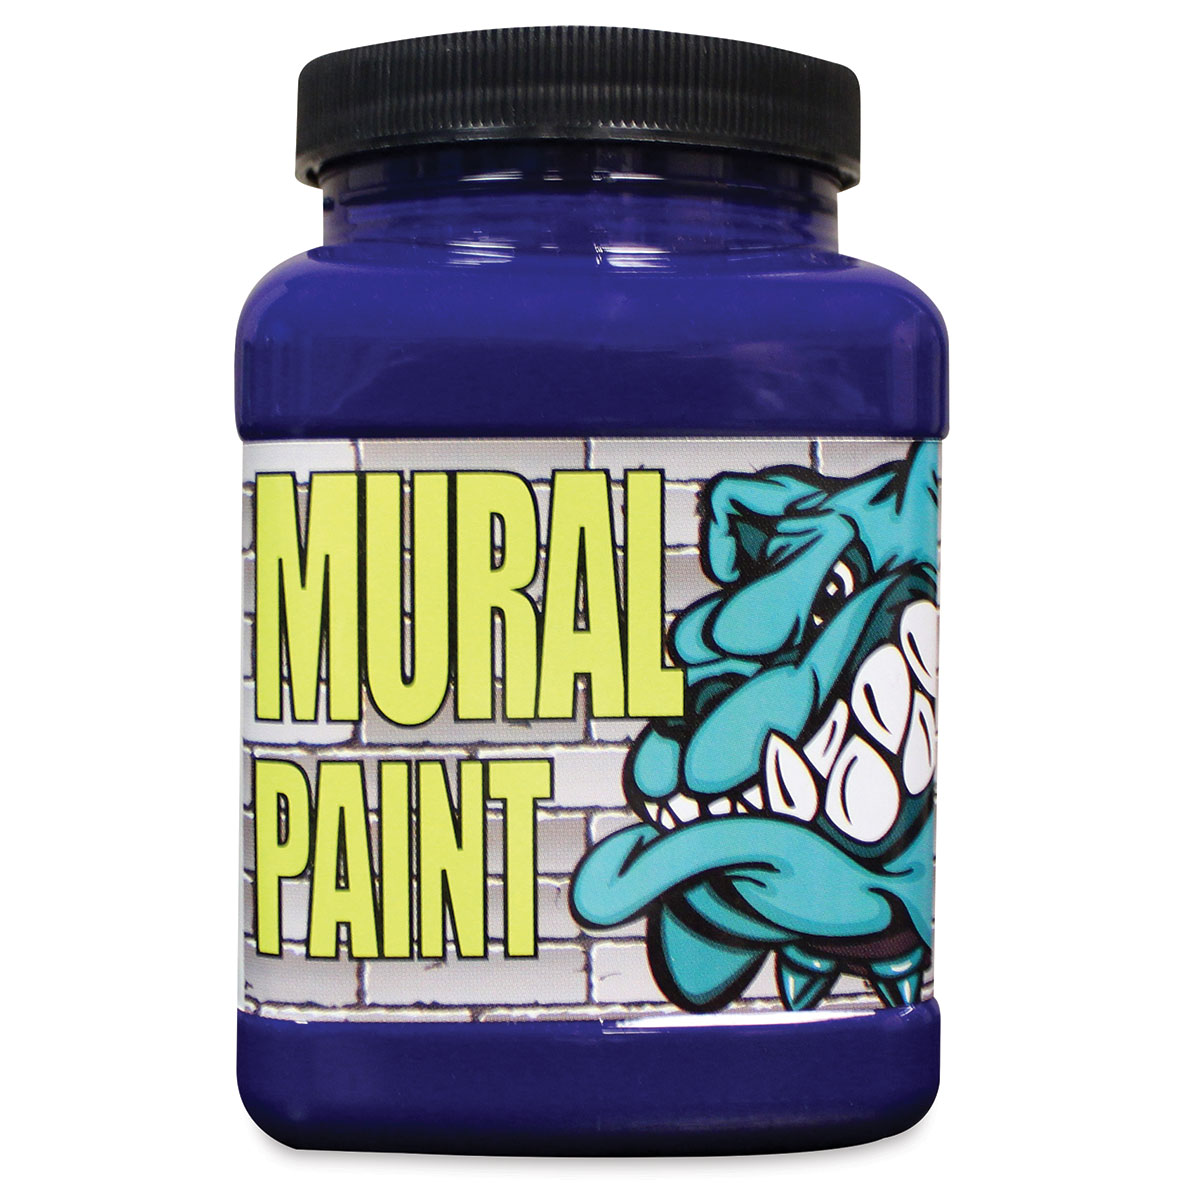 Chroma Acrylic Mural Paint - Primary Colors (Set of 6), 16oz Jars